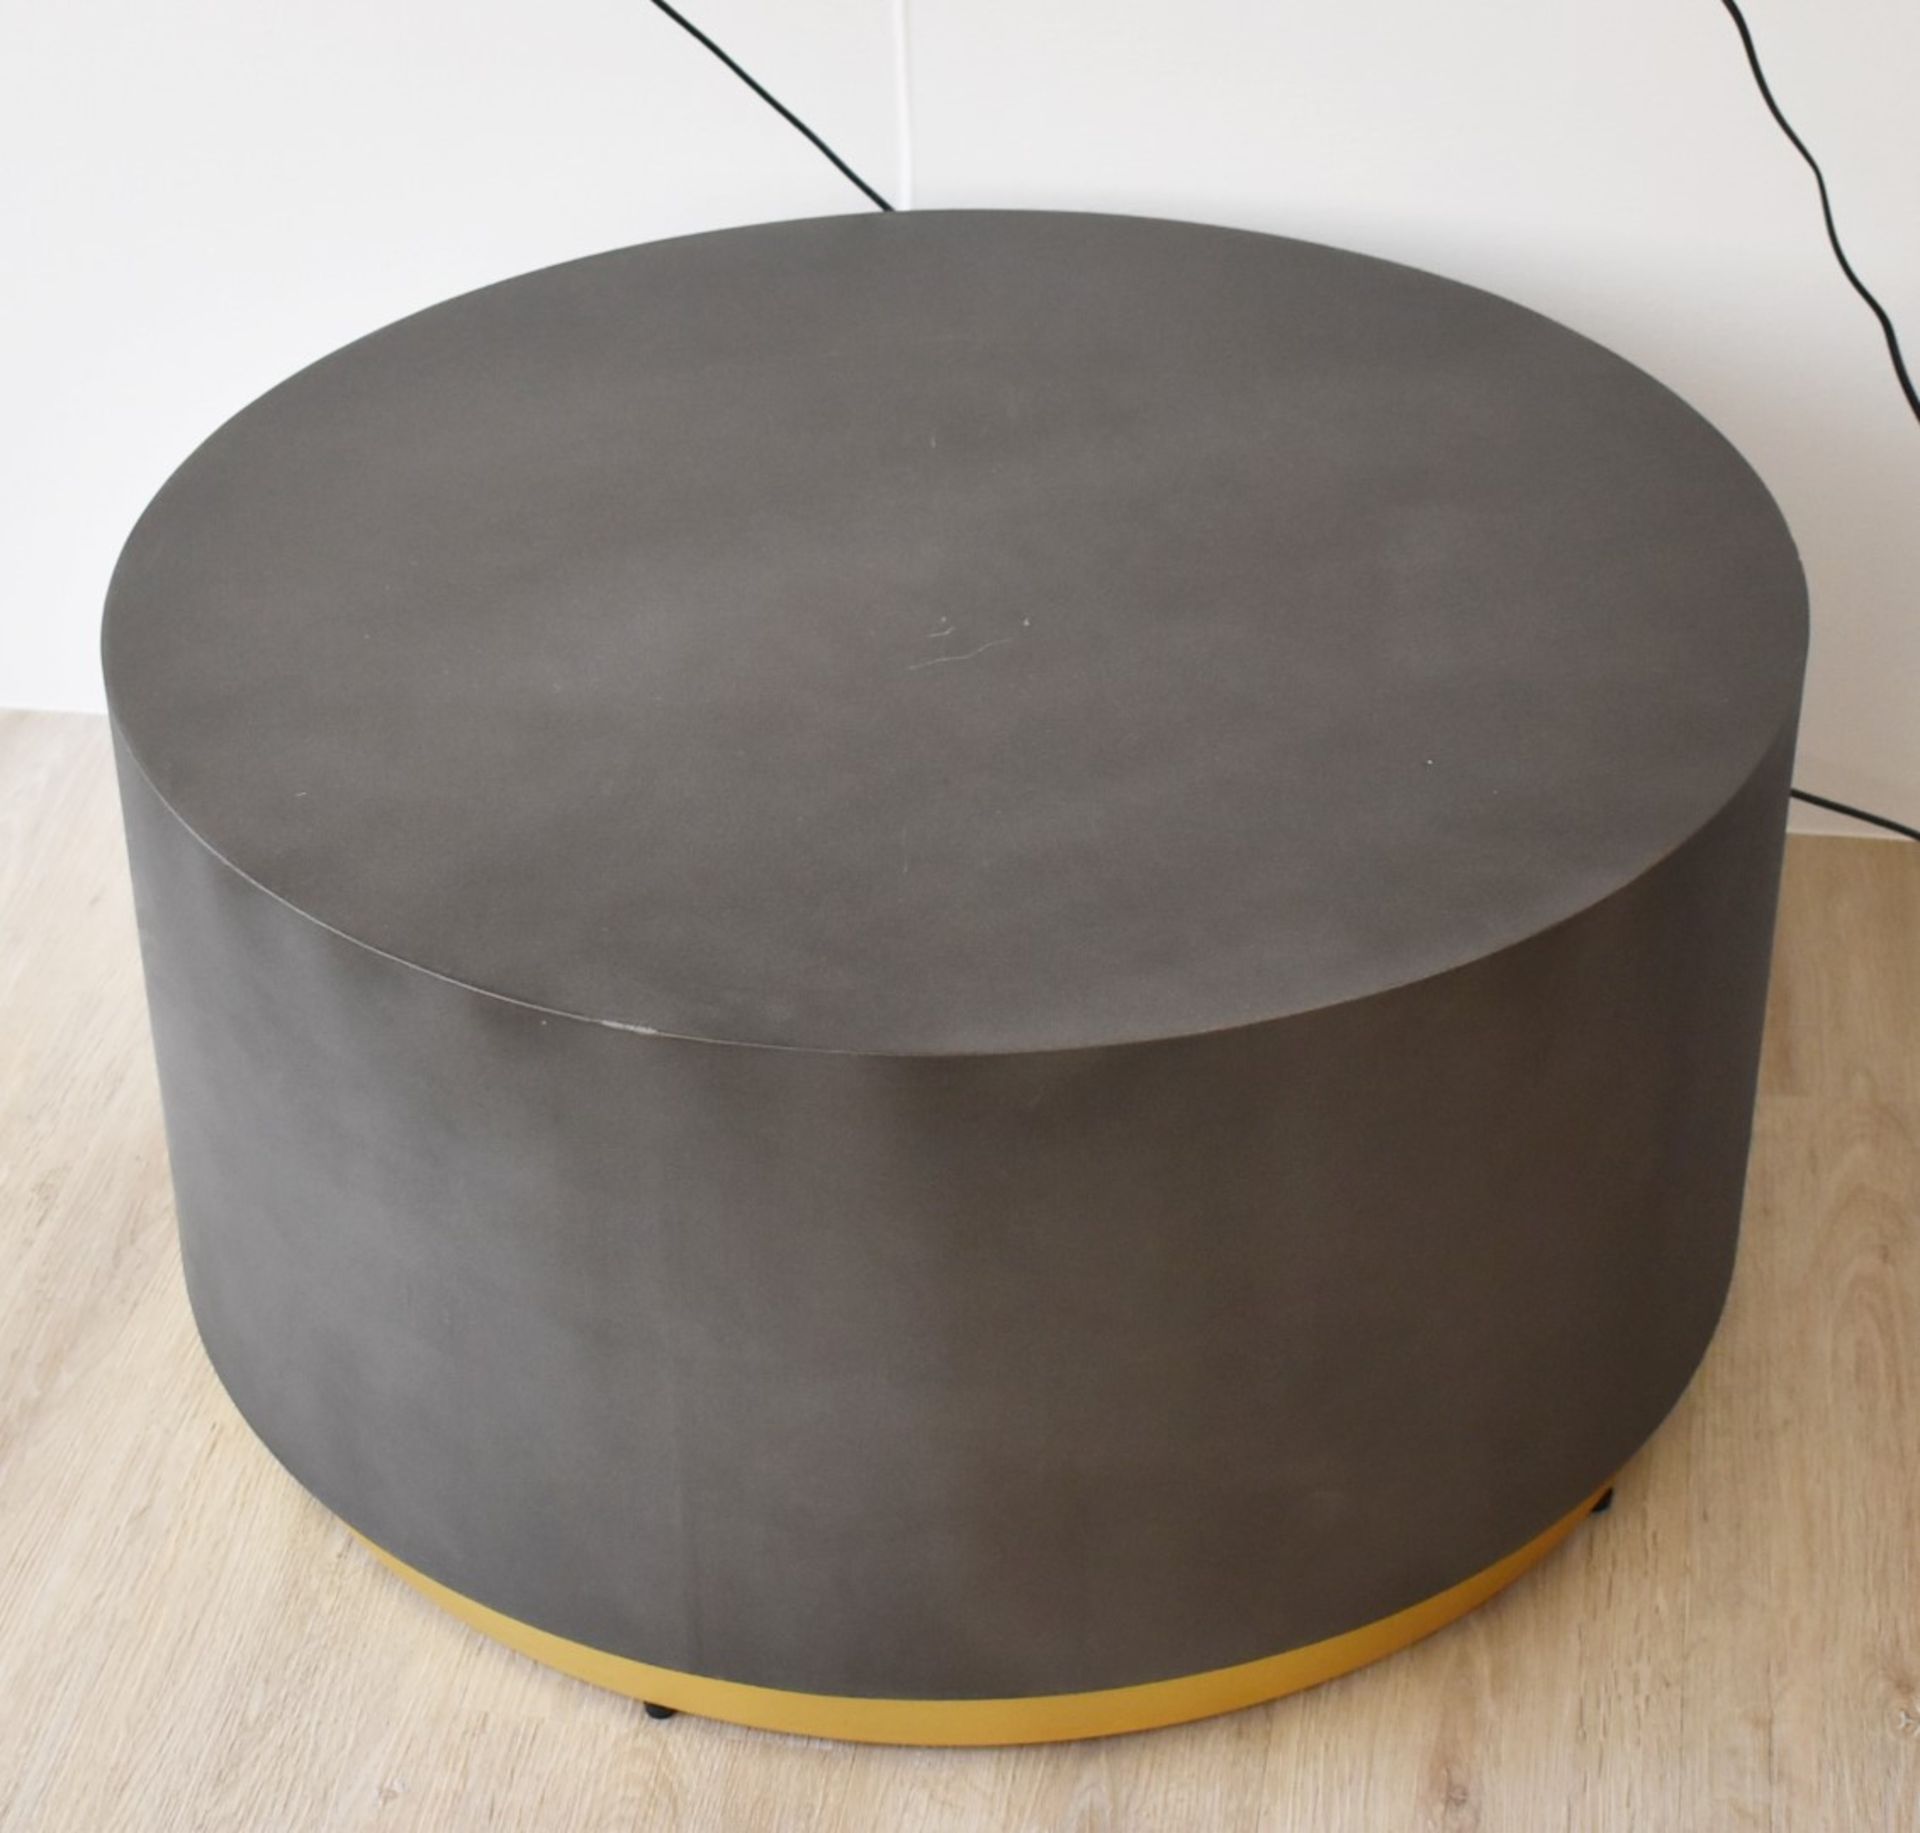 1 x Round Coffee Table With Concrete Effect Finish and Gold Base - RRP £455 - NO VAT ON THE HAMMER! - Image 5 of 7